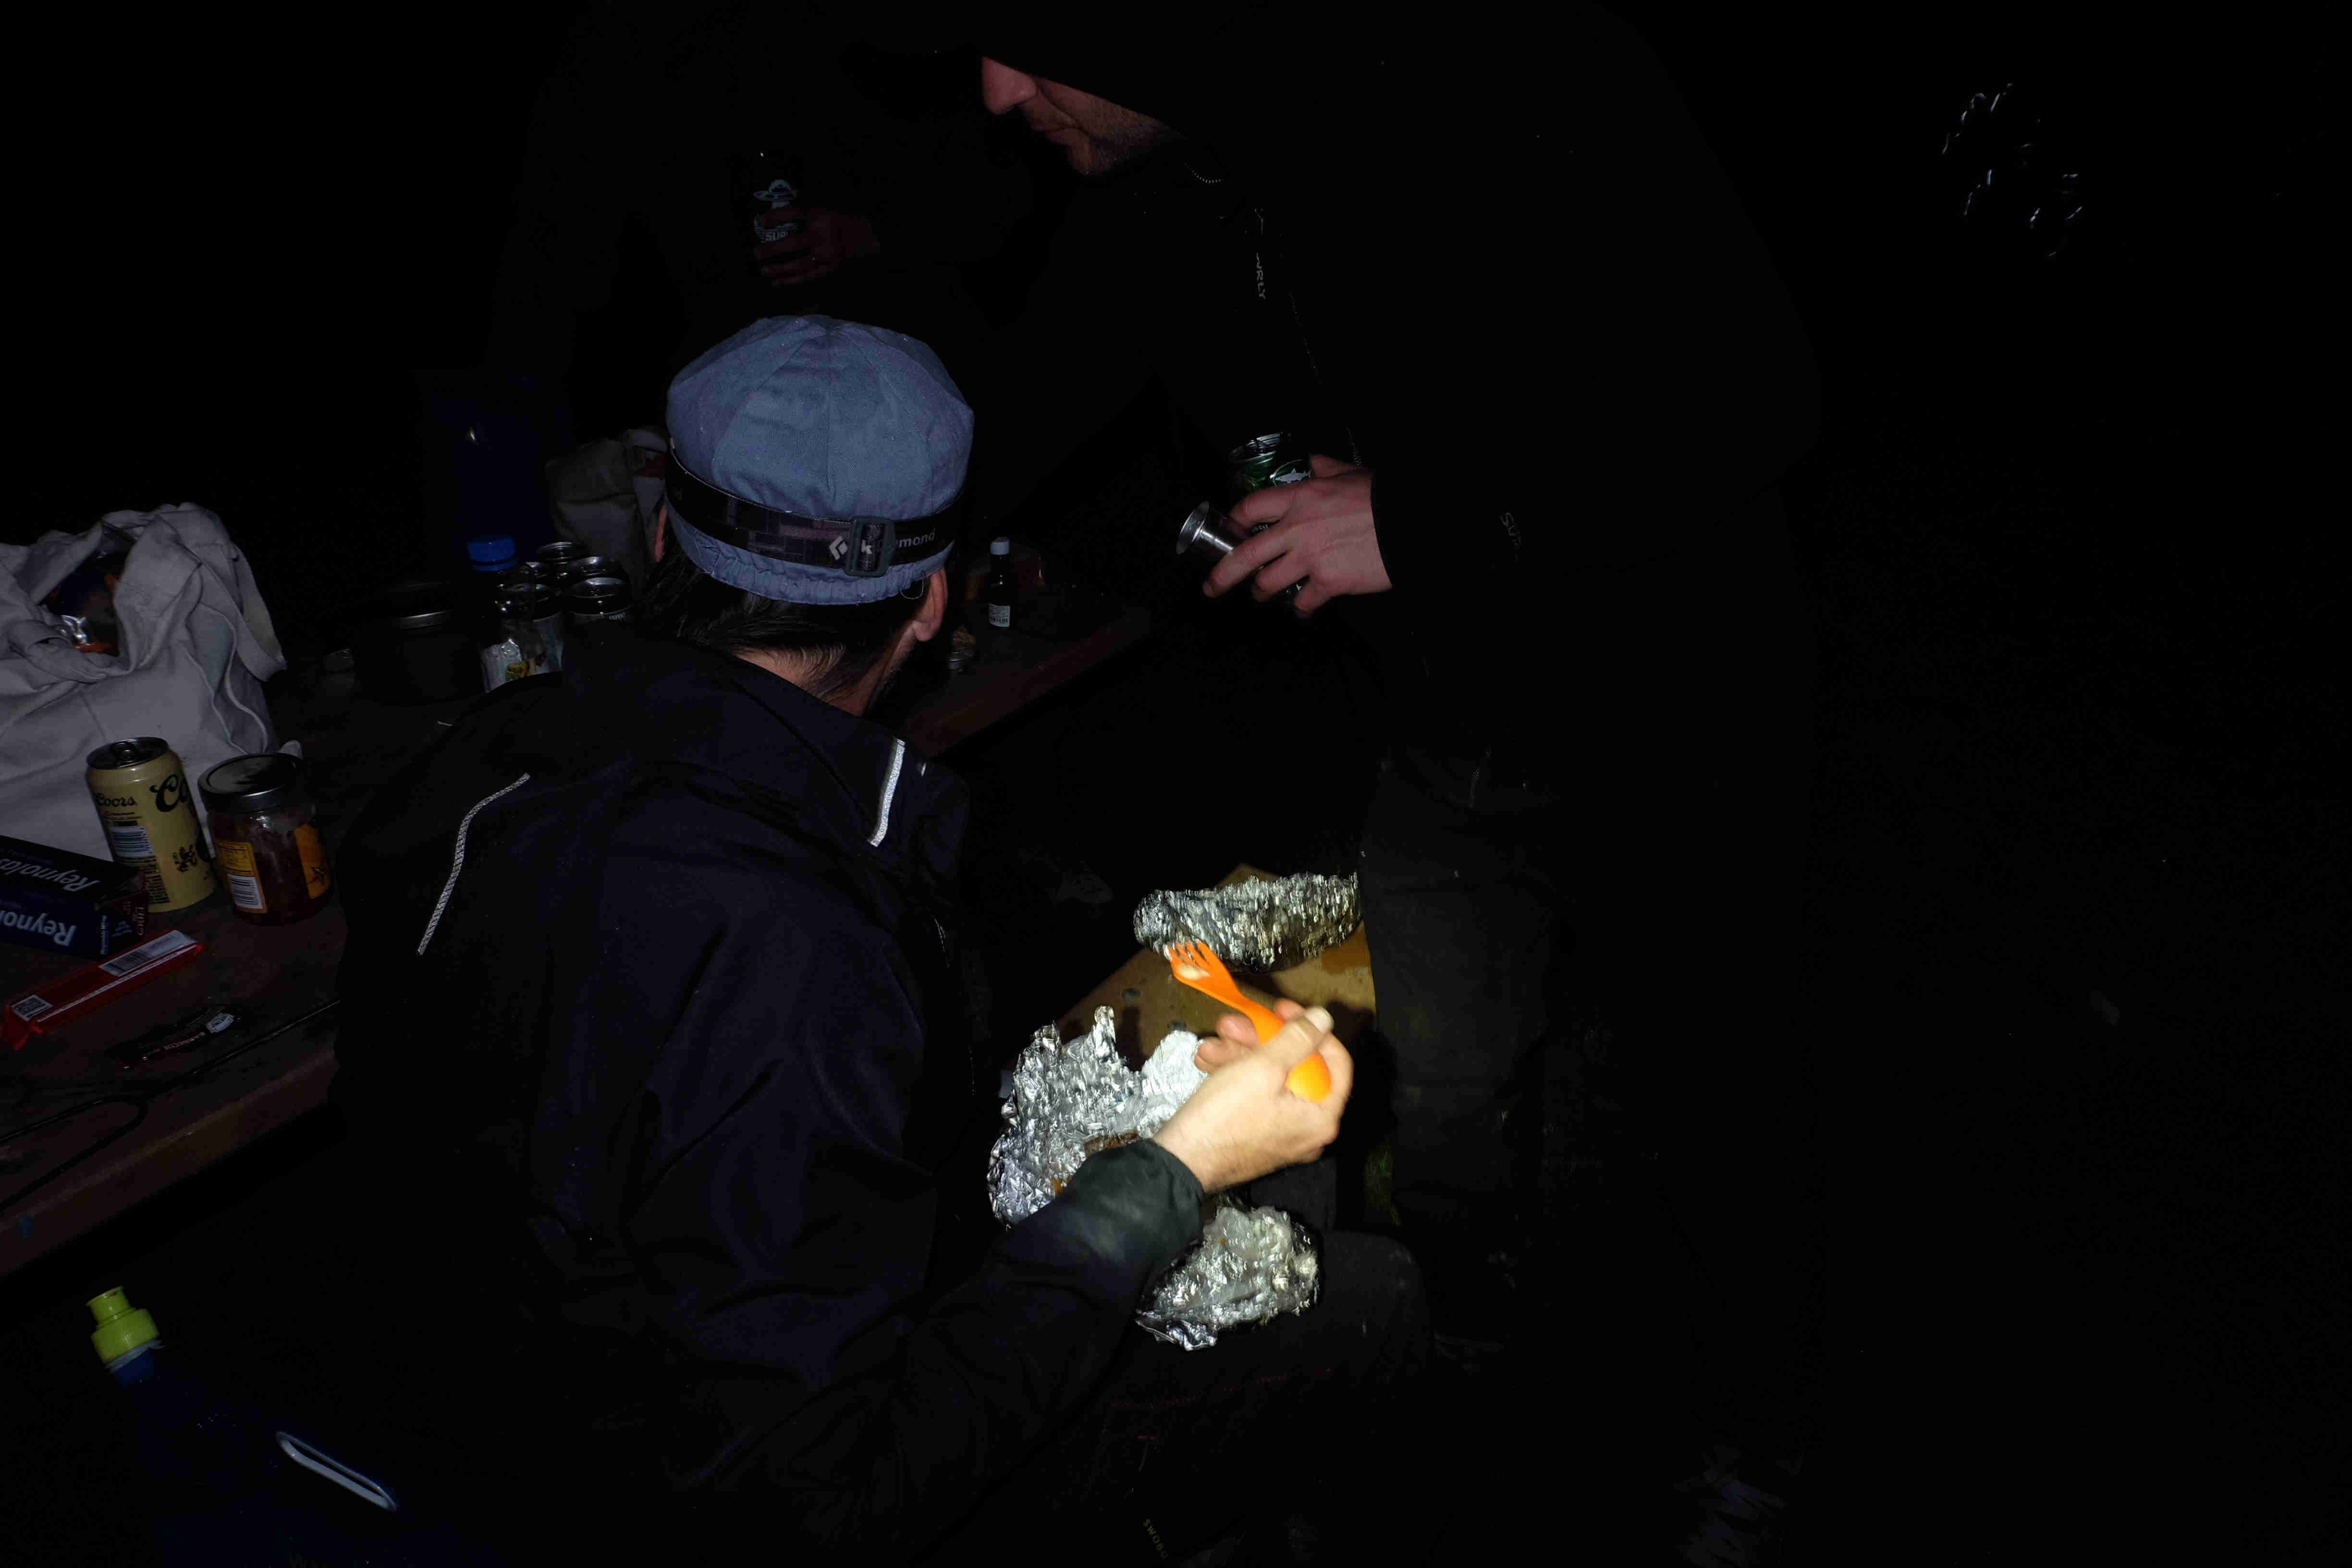 Two people at a picnic table, eating food on top of foil, in the dark at night